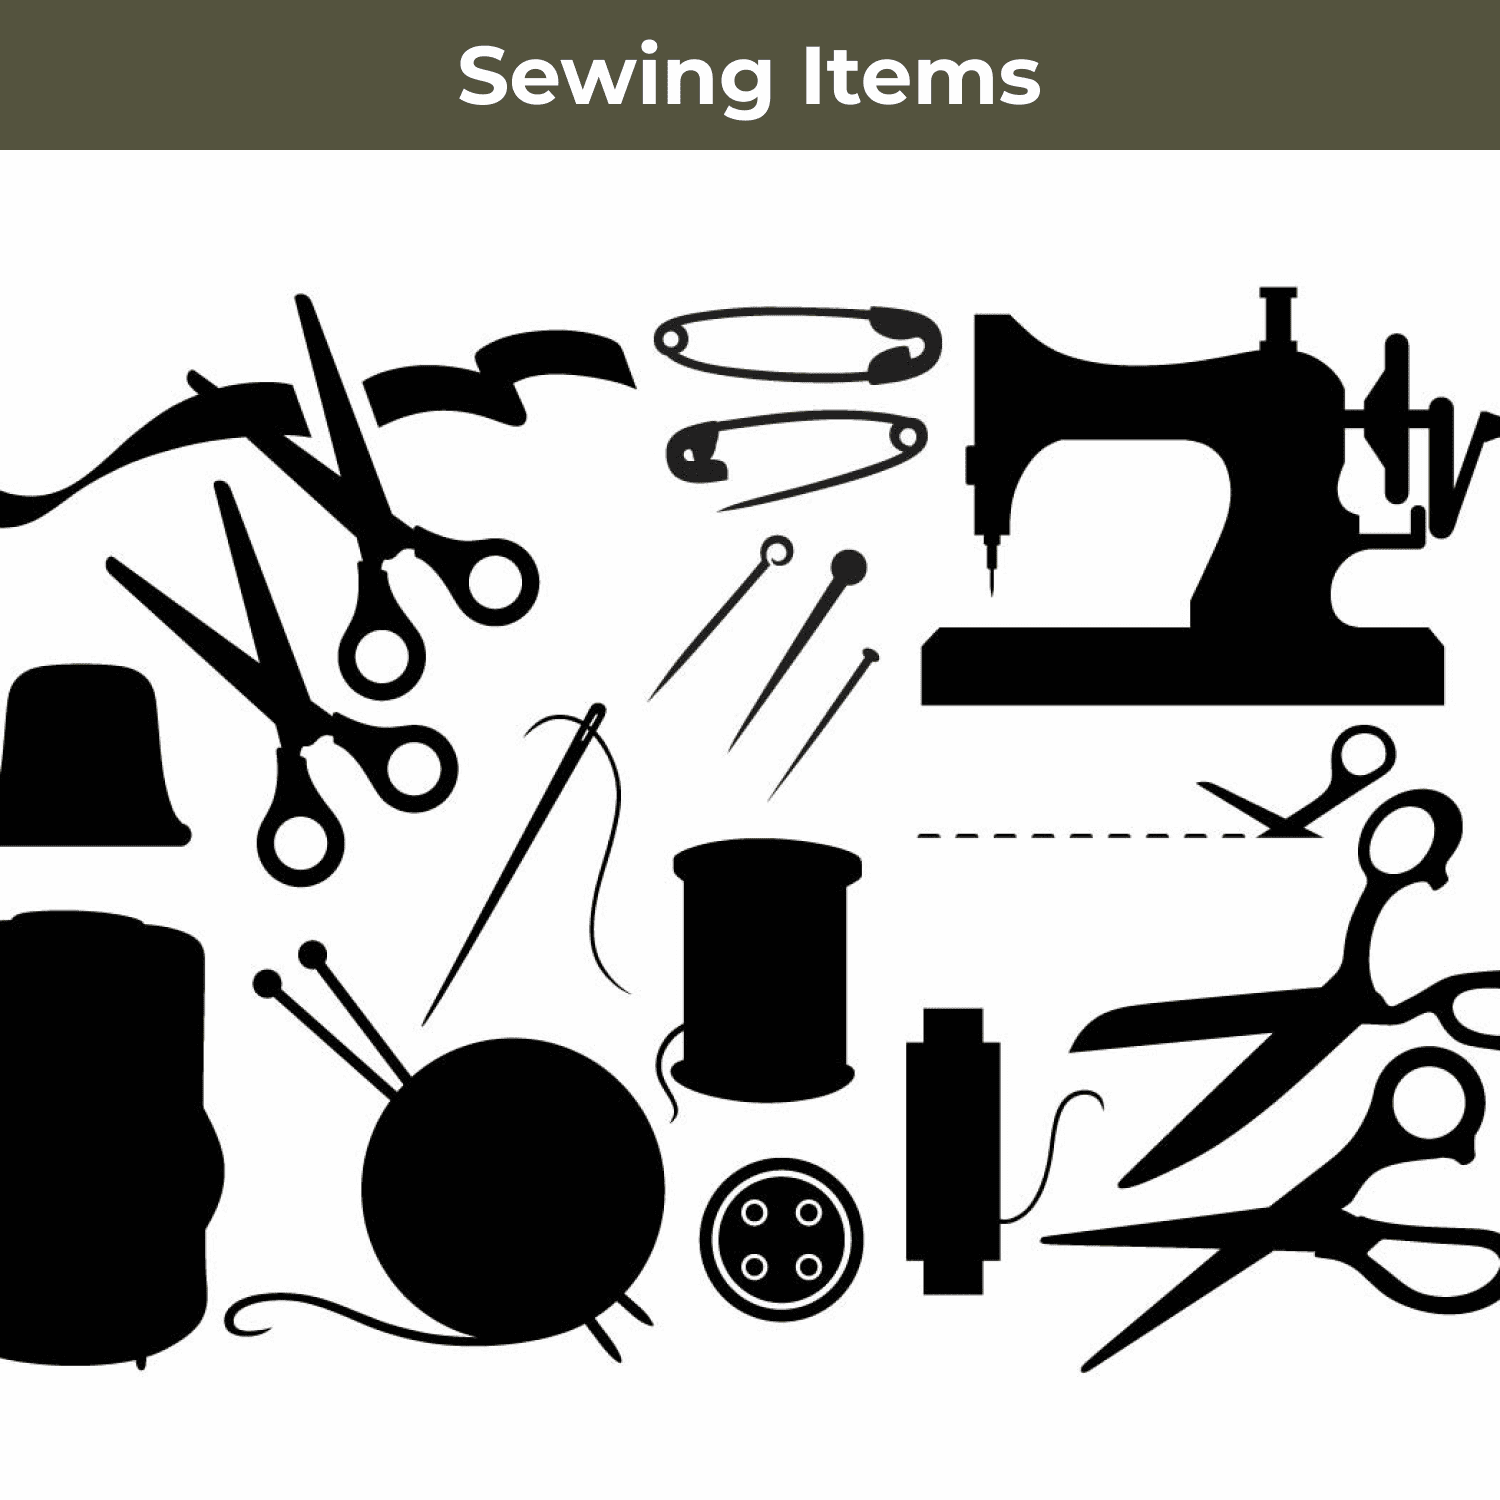 Sewing Items cover image.